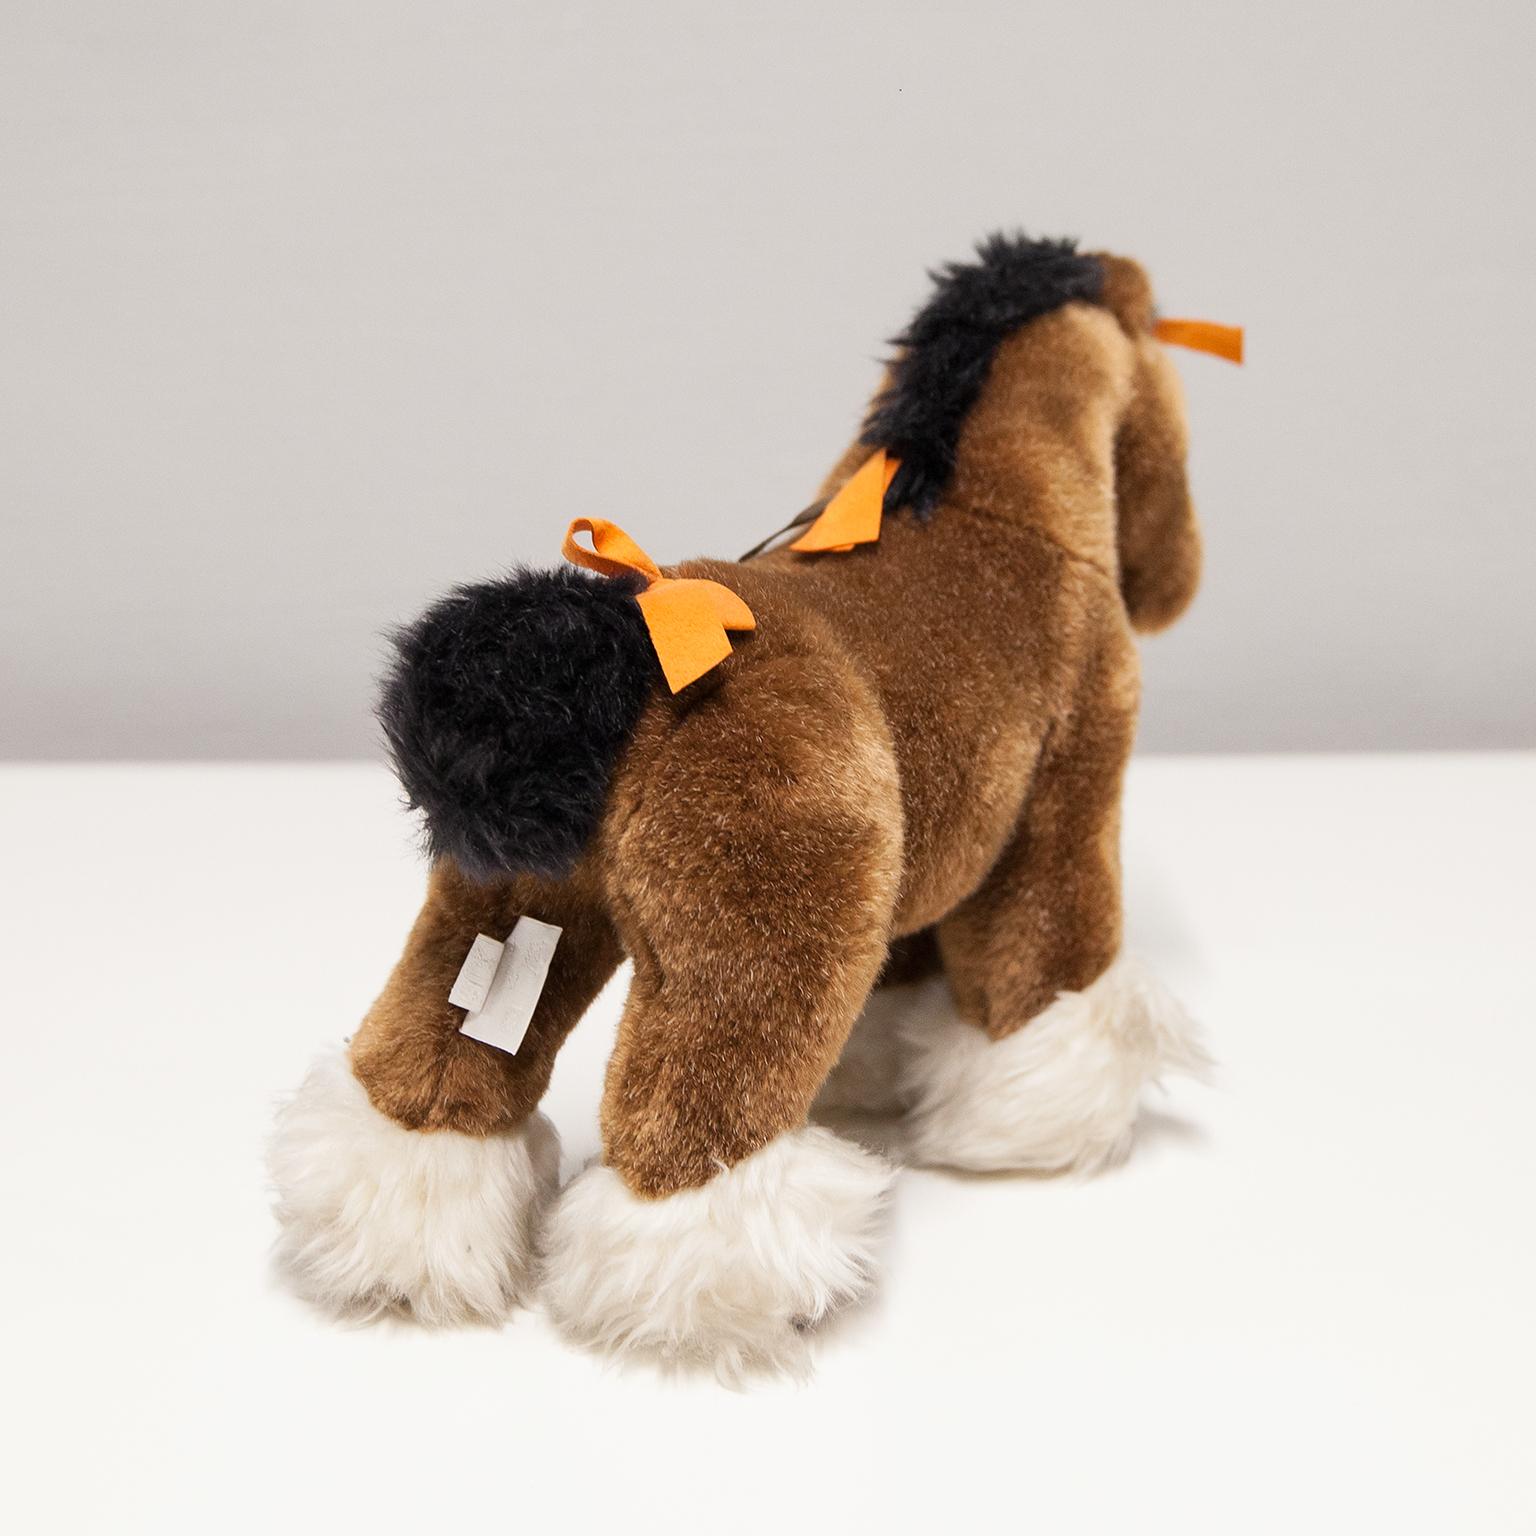 Hermes Stuffed Toy Hermy Horse In Good Condition For Sale In Munich, DE